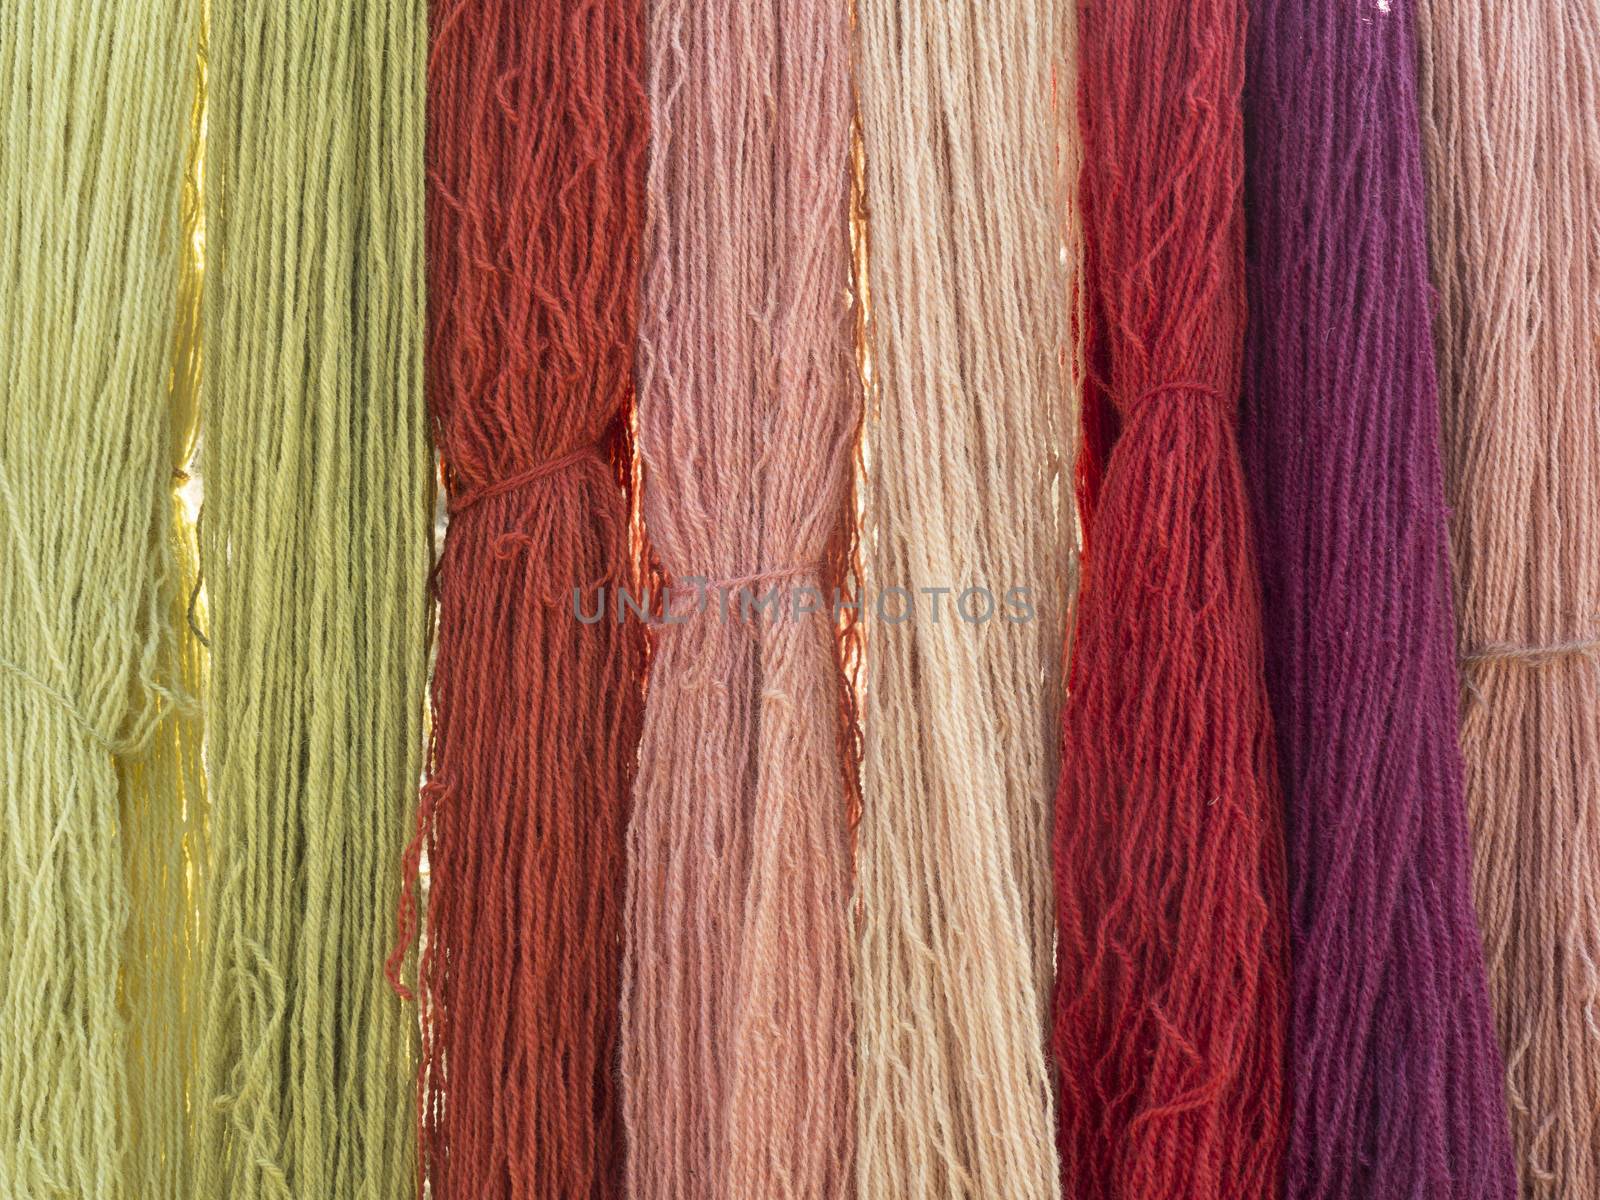 Vegetable dyed knitting wool seen on a medieval market.